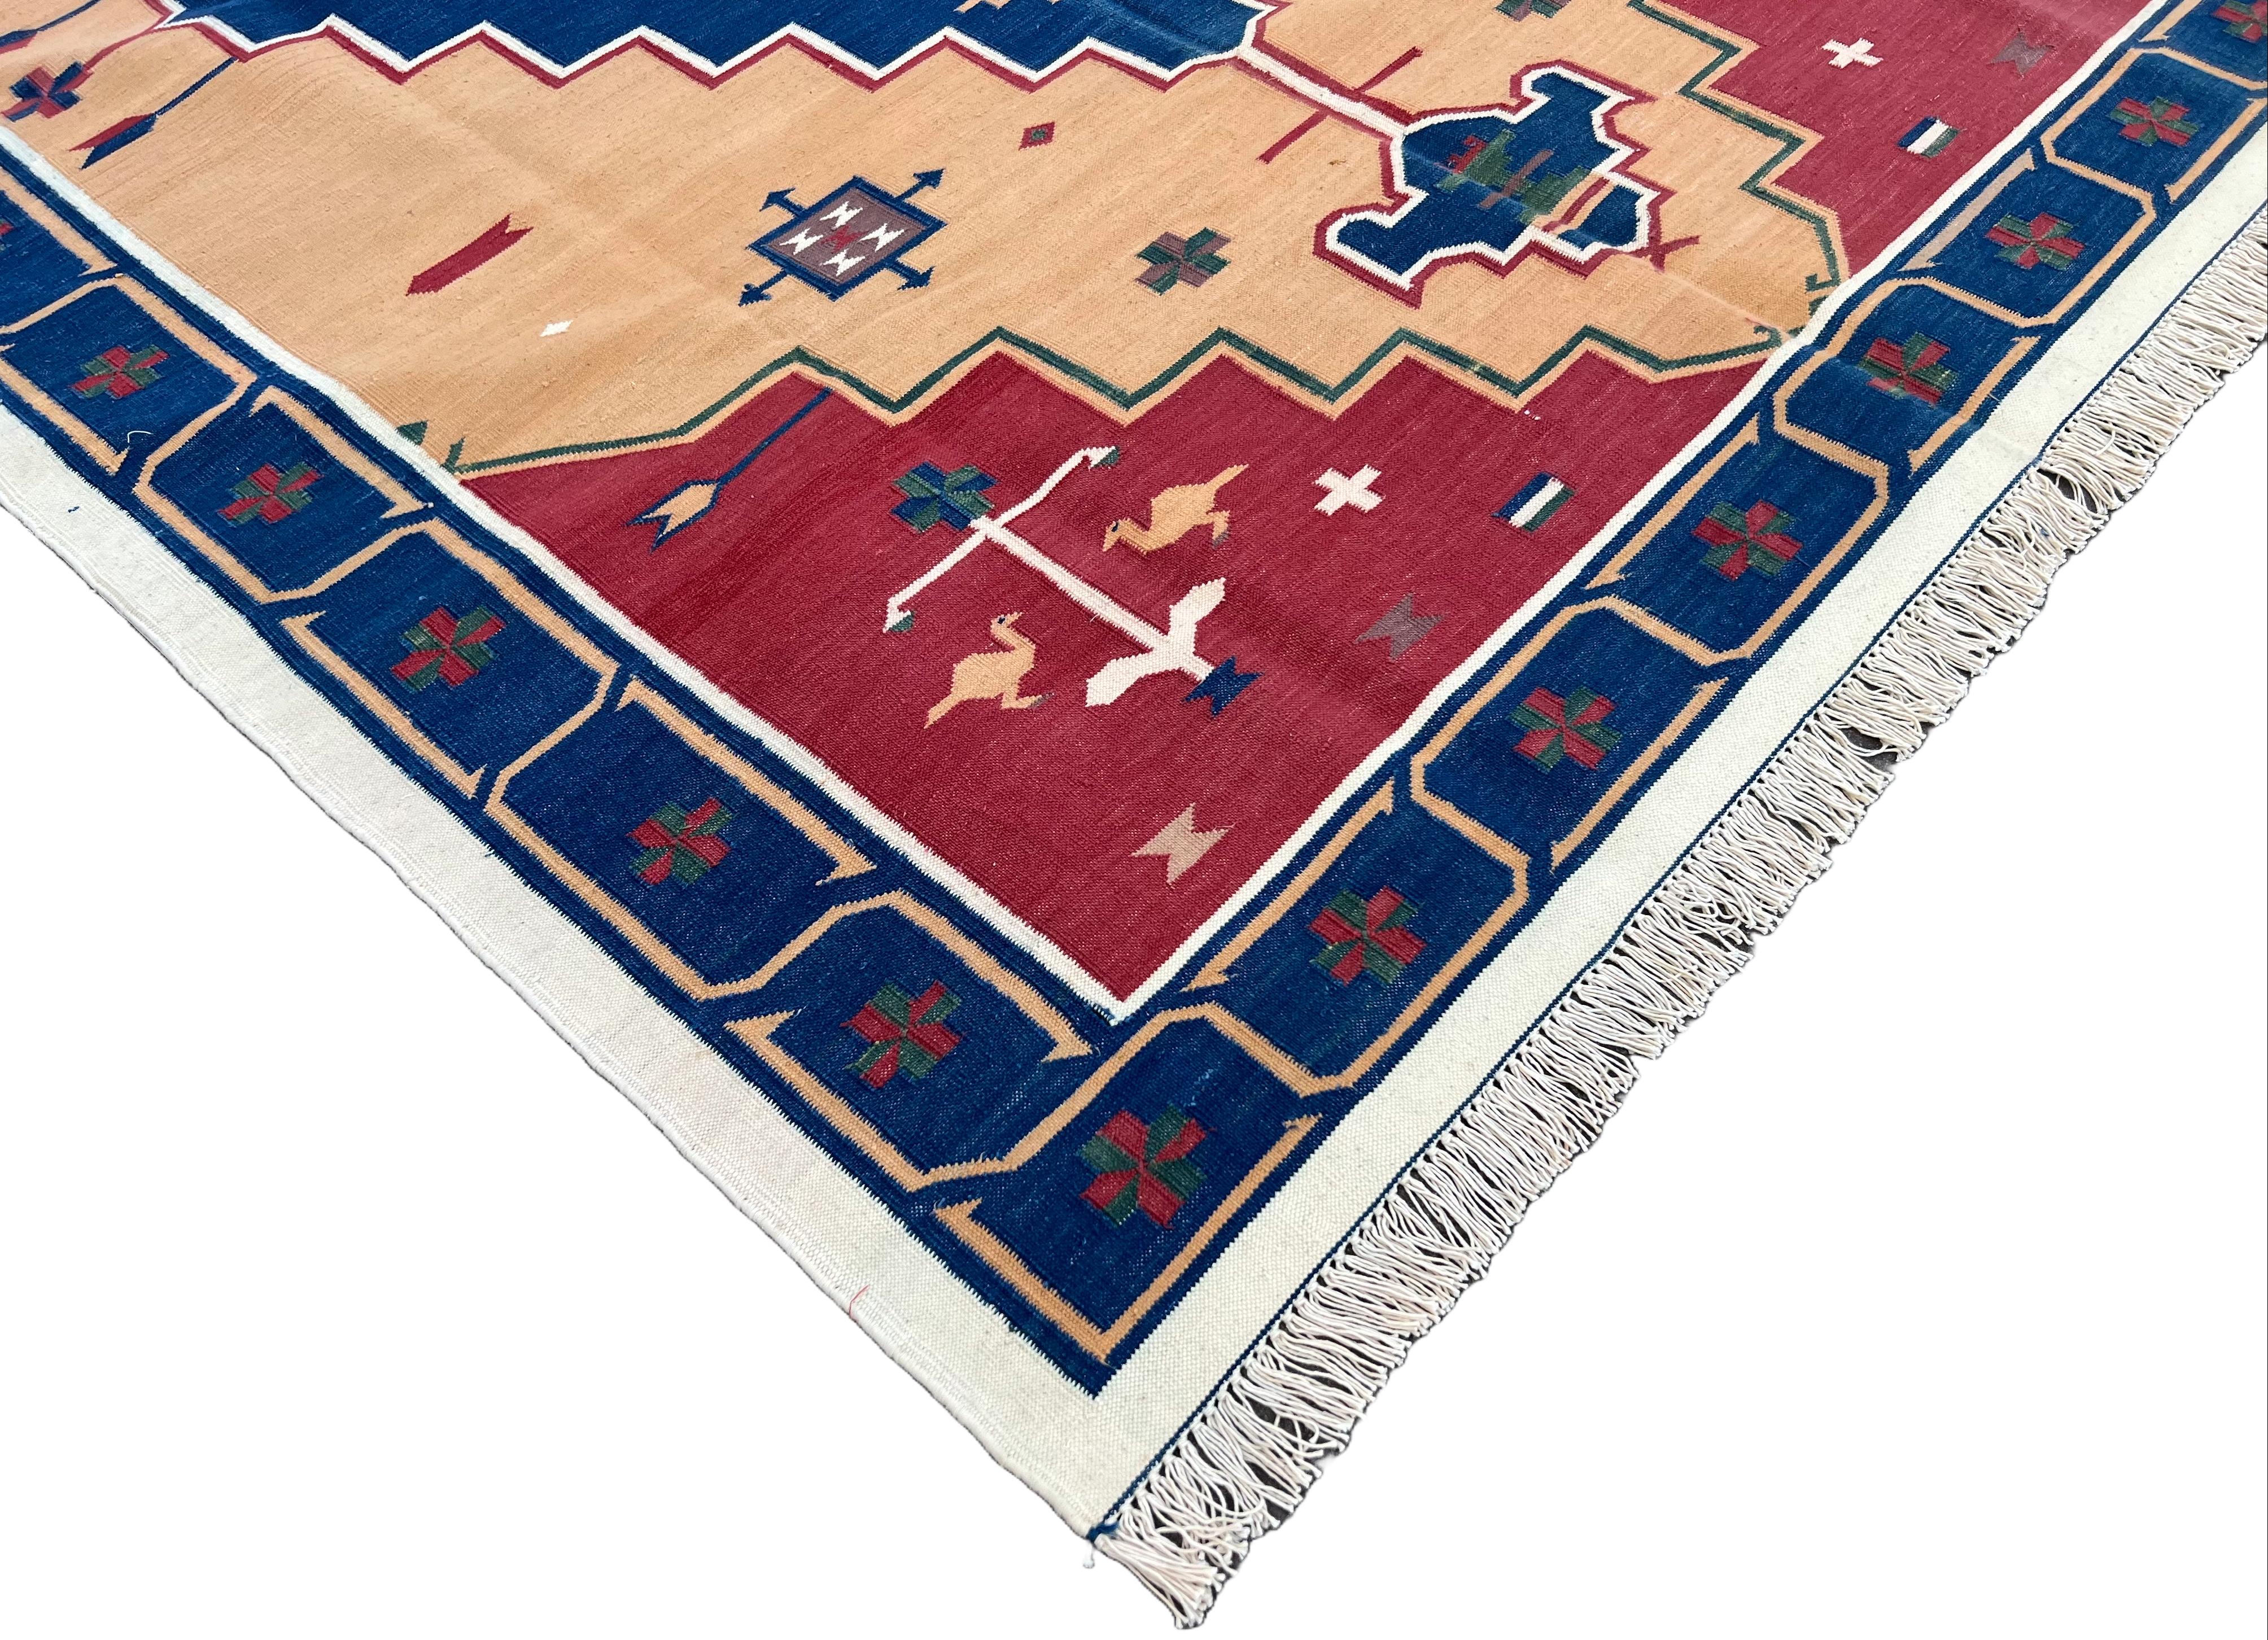 Hand-Woven Handmade Cotton Area Flat Weave Rug, 5x8 Blue And Red Geometric Indian Dhurrie For Sale